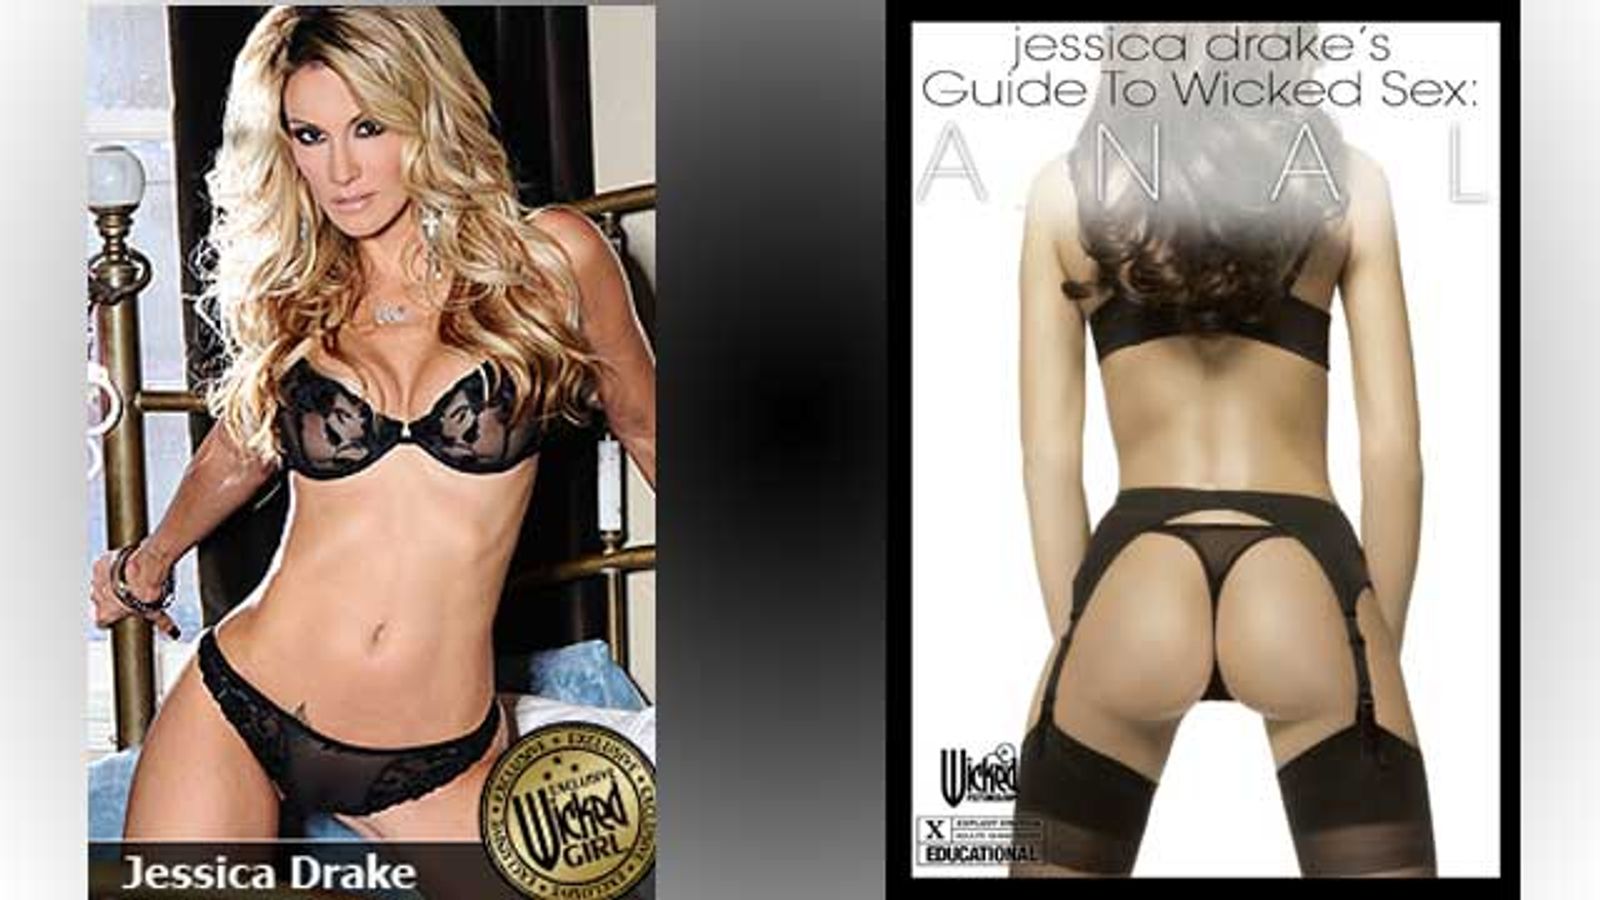 Jessica Drake On 'After Hours with Heidi and Frank' Friday